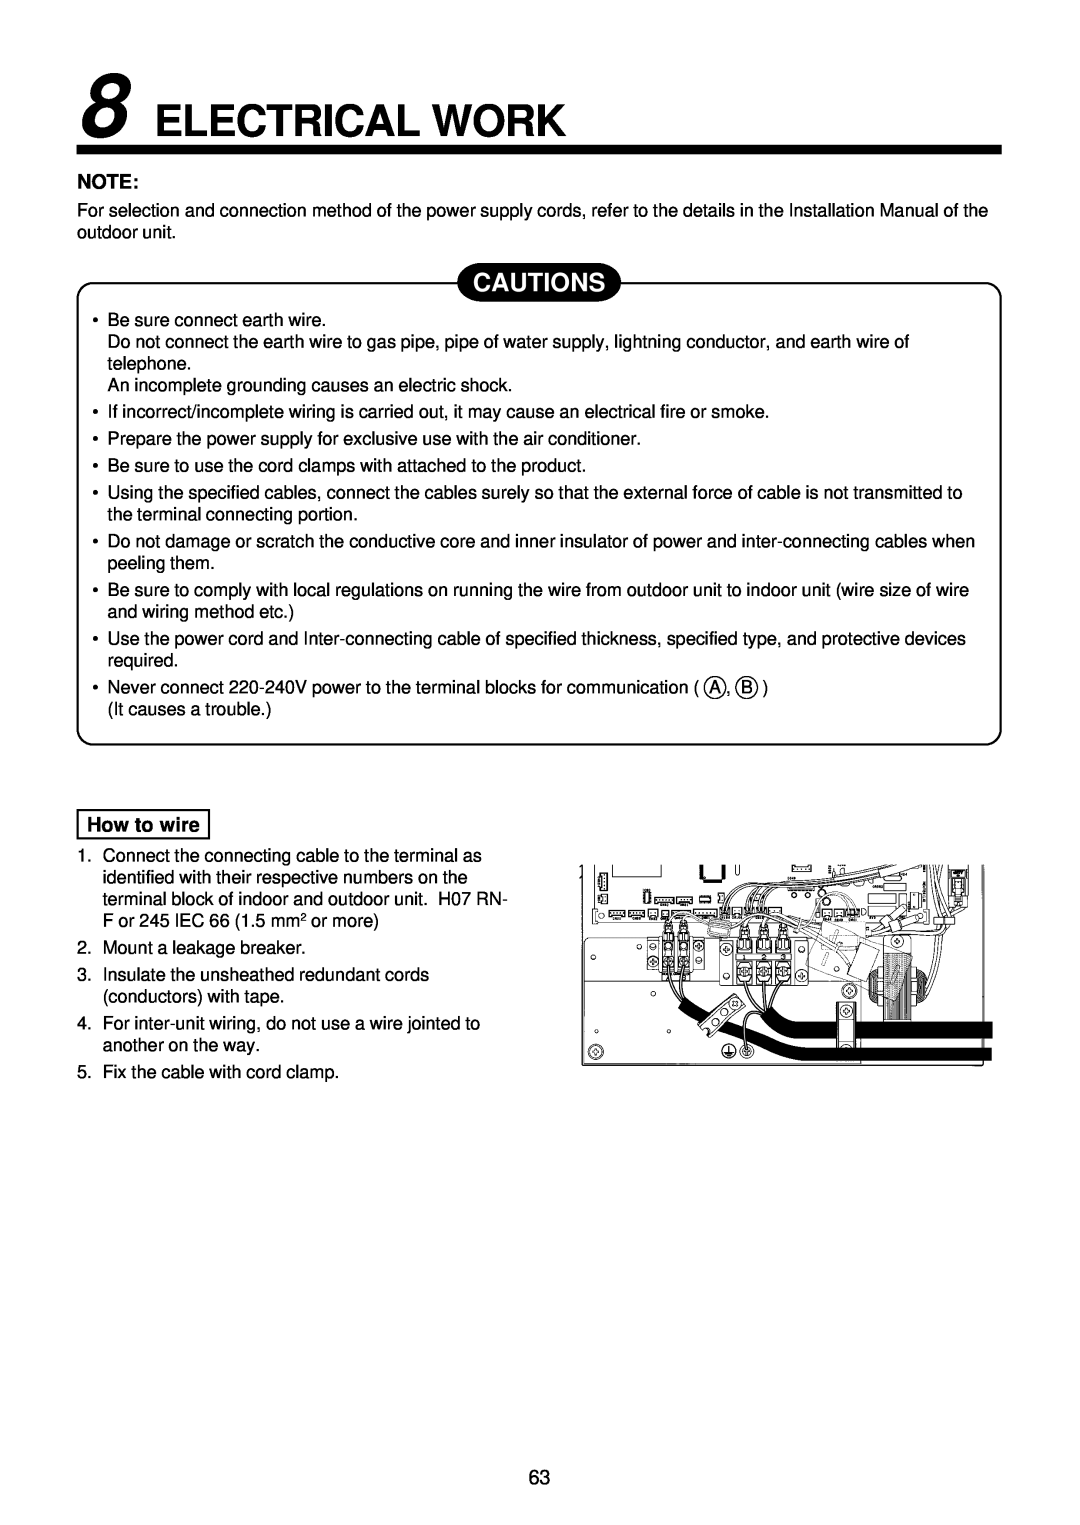 Toshiba R410A service manual Electrical Work, Cautions, How to wire 